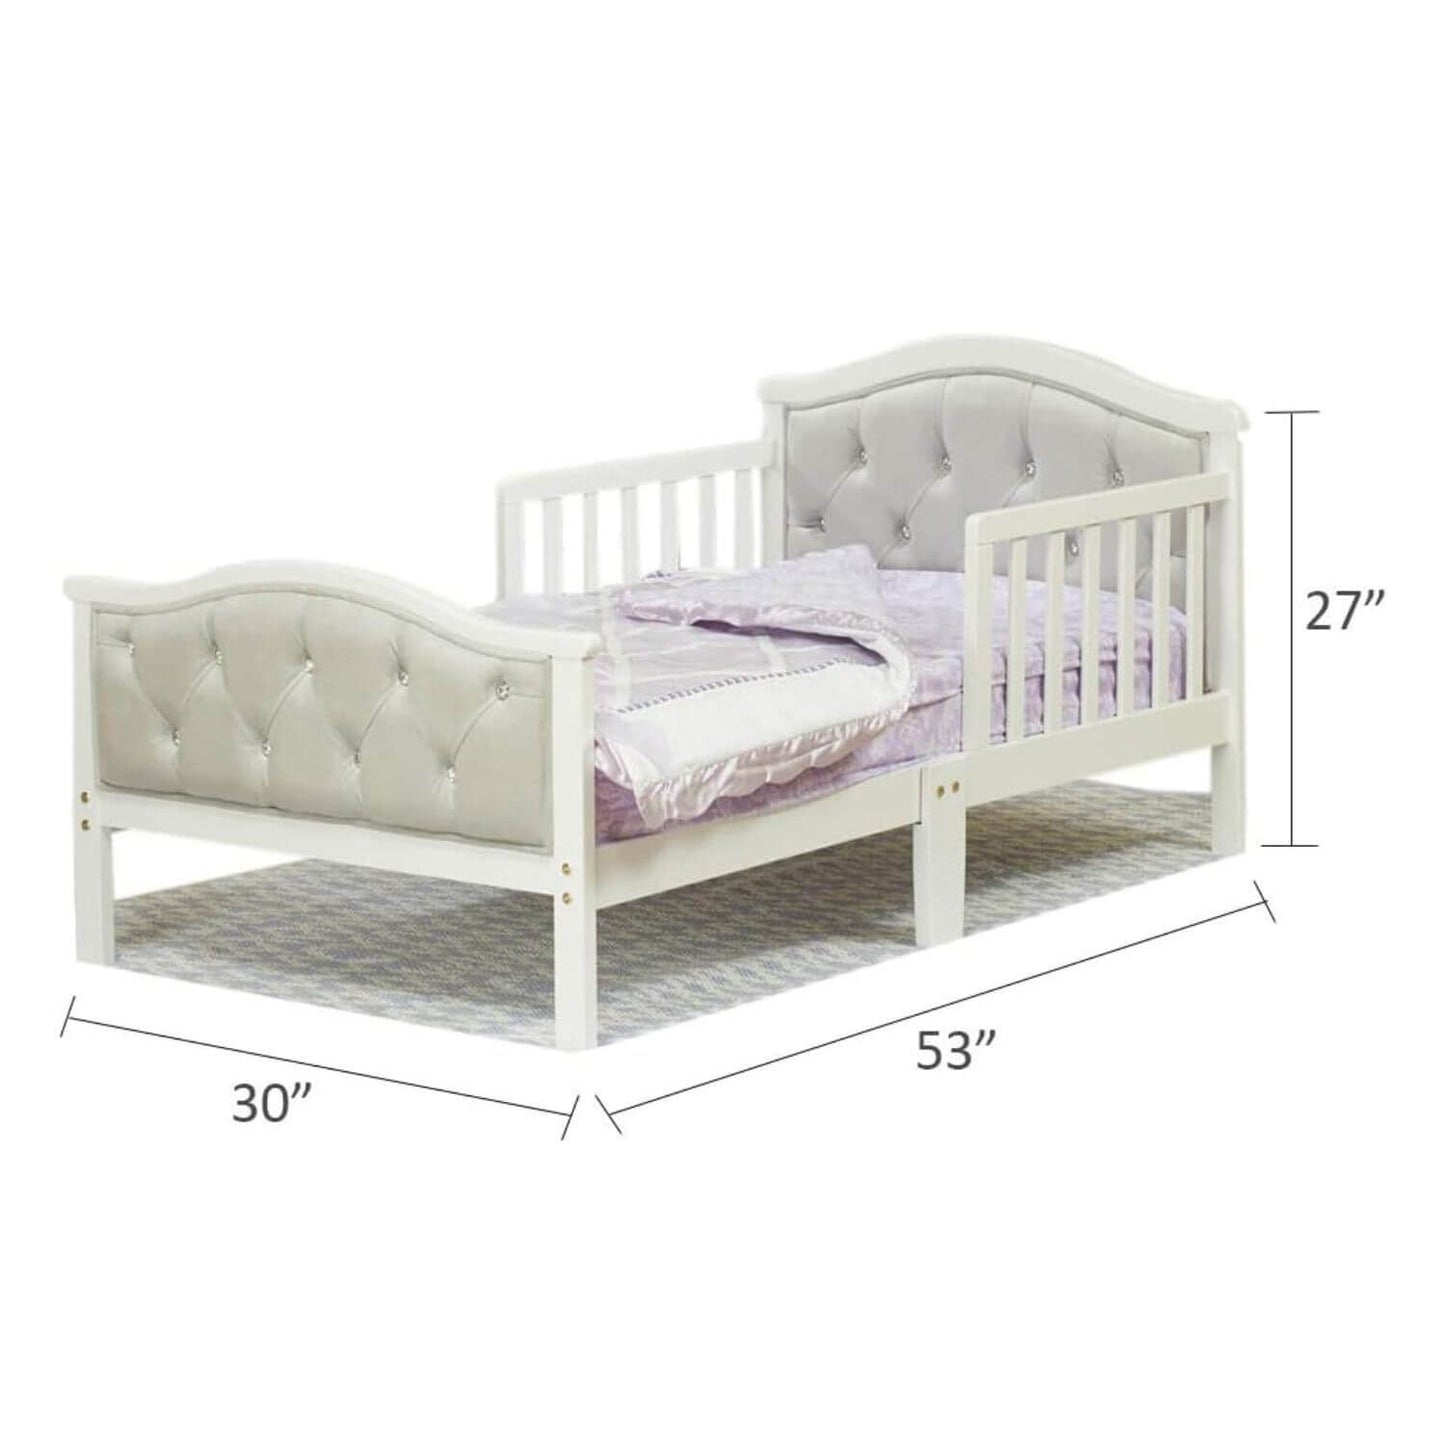 Orbelle French White Padded Gray Toddler Bed - Dimensions